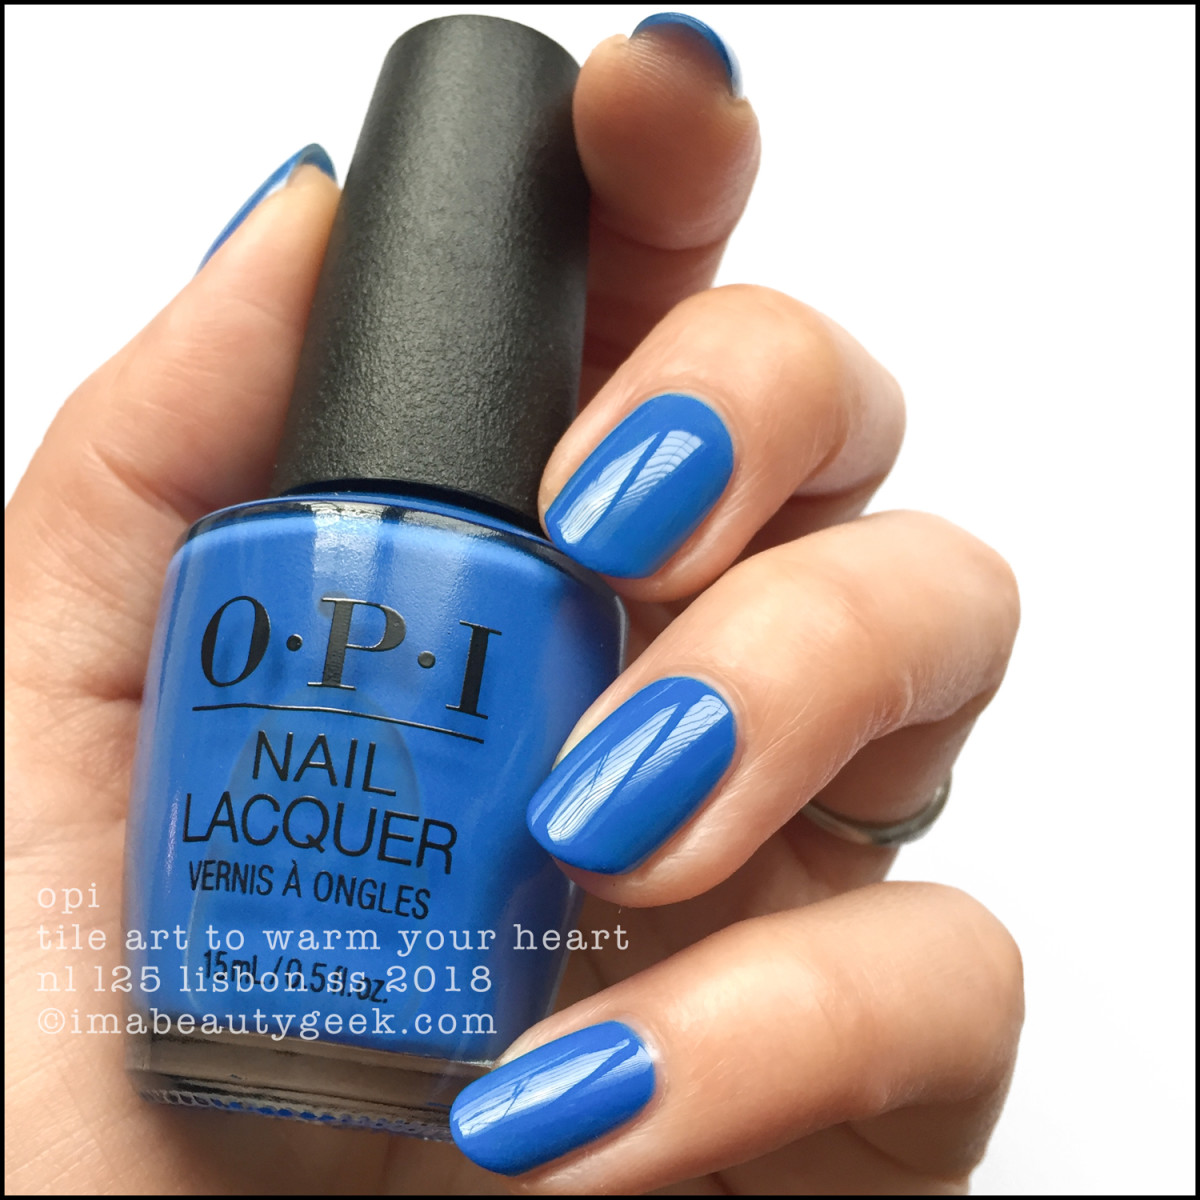 OPI Tile Art to Warm Your Heart _ OPI Lisbon Collection Swatches